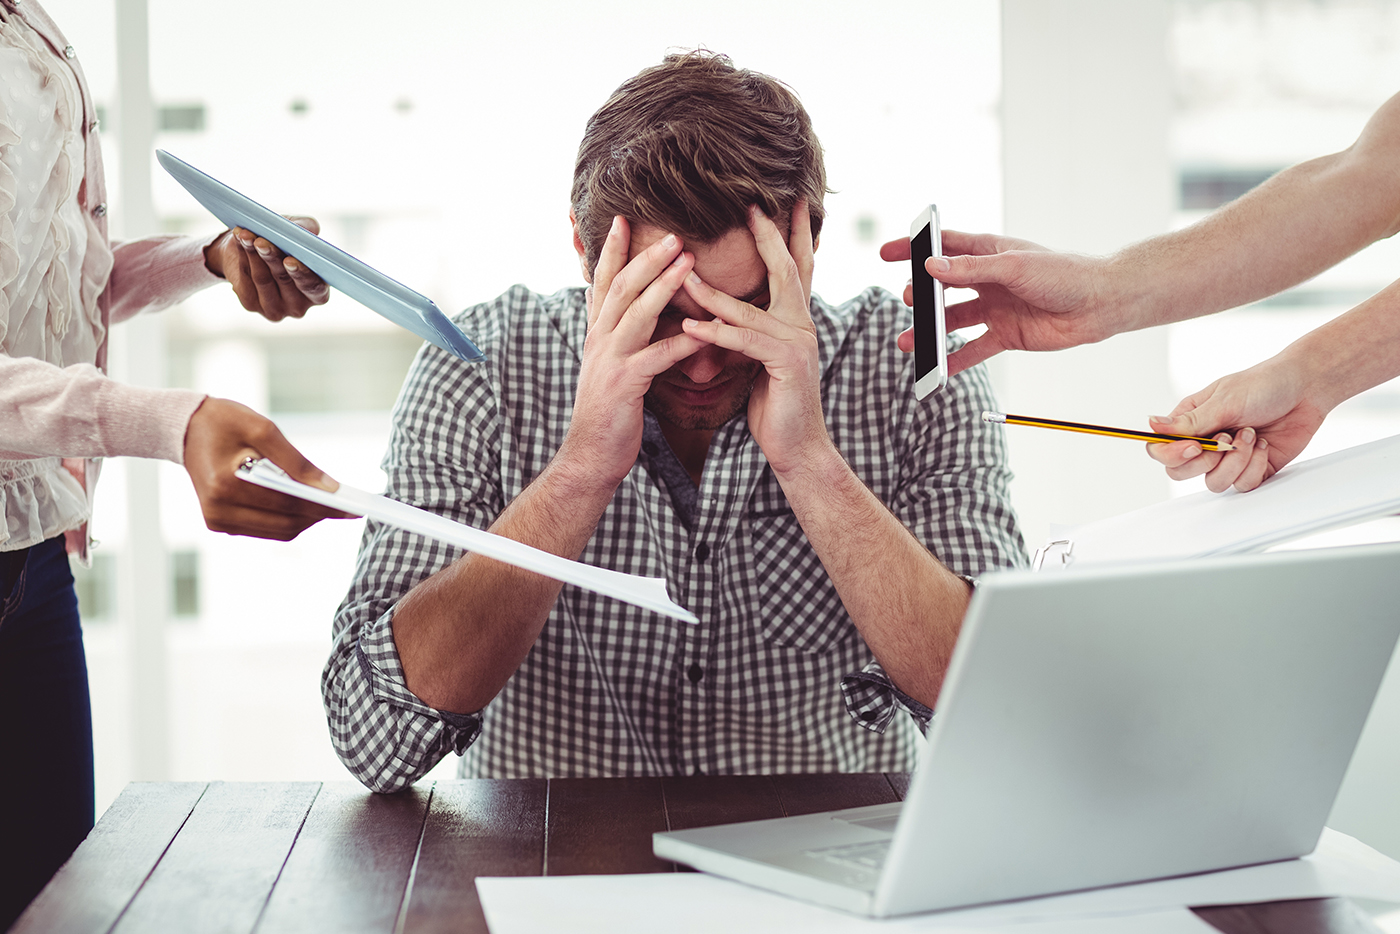 Feeling Overwhelmed at Work? These 16 Tips Can Help | Bernard Marr